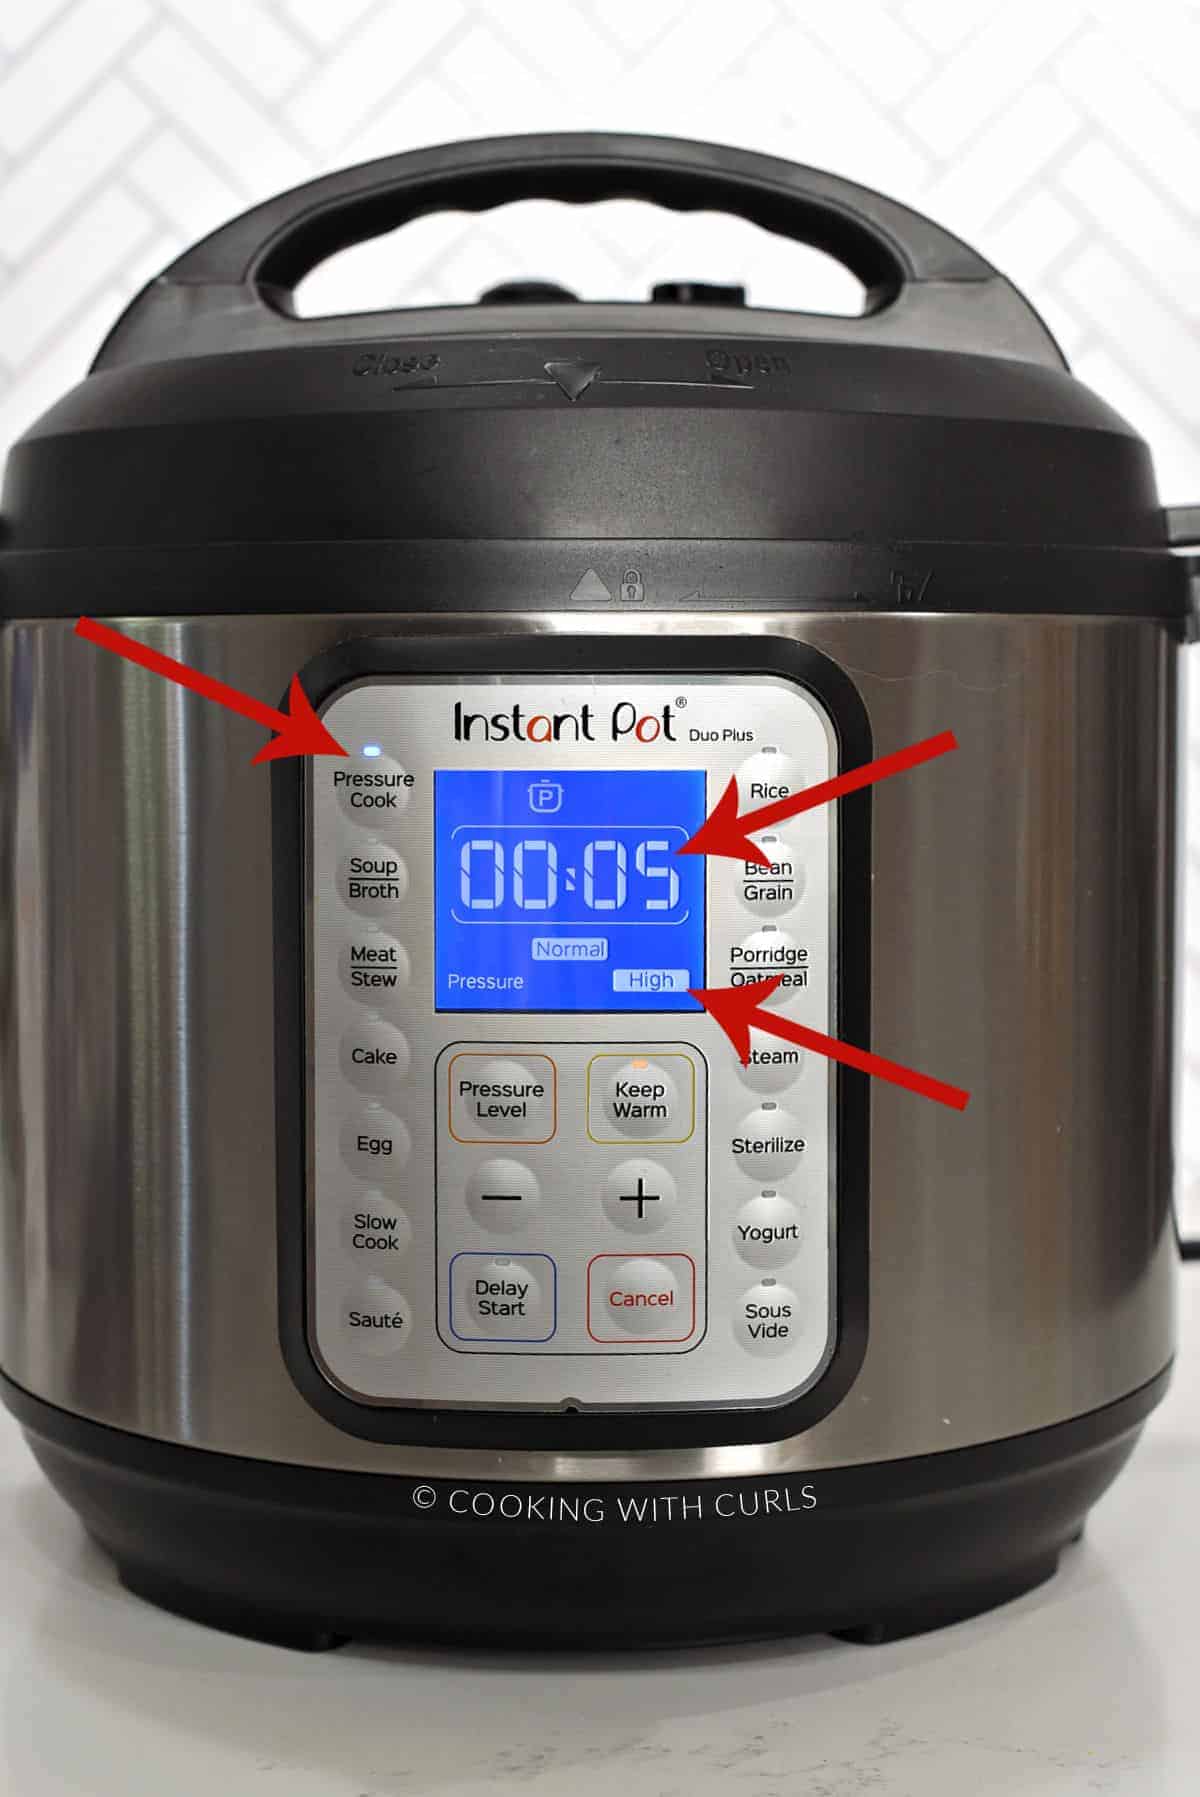 Instant Pot set to Pressure Cook on High pressure for 5 minutes.